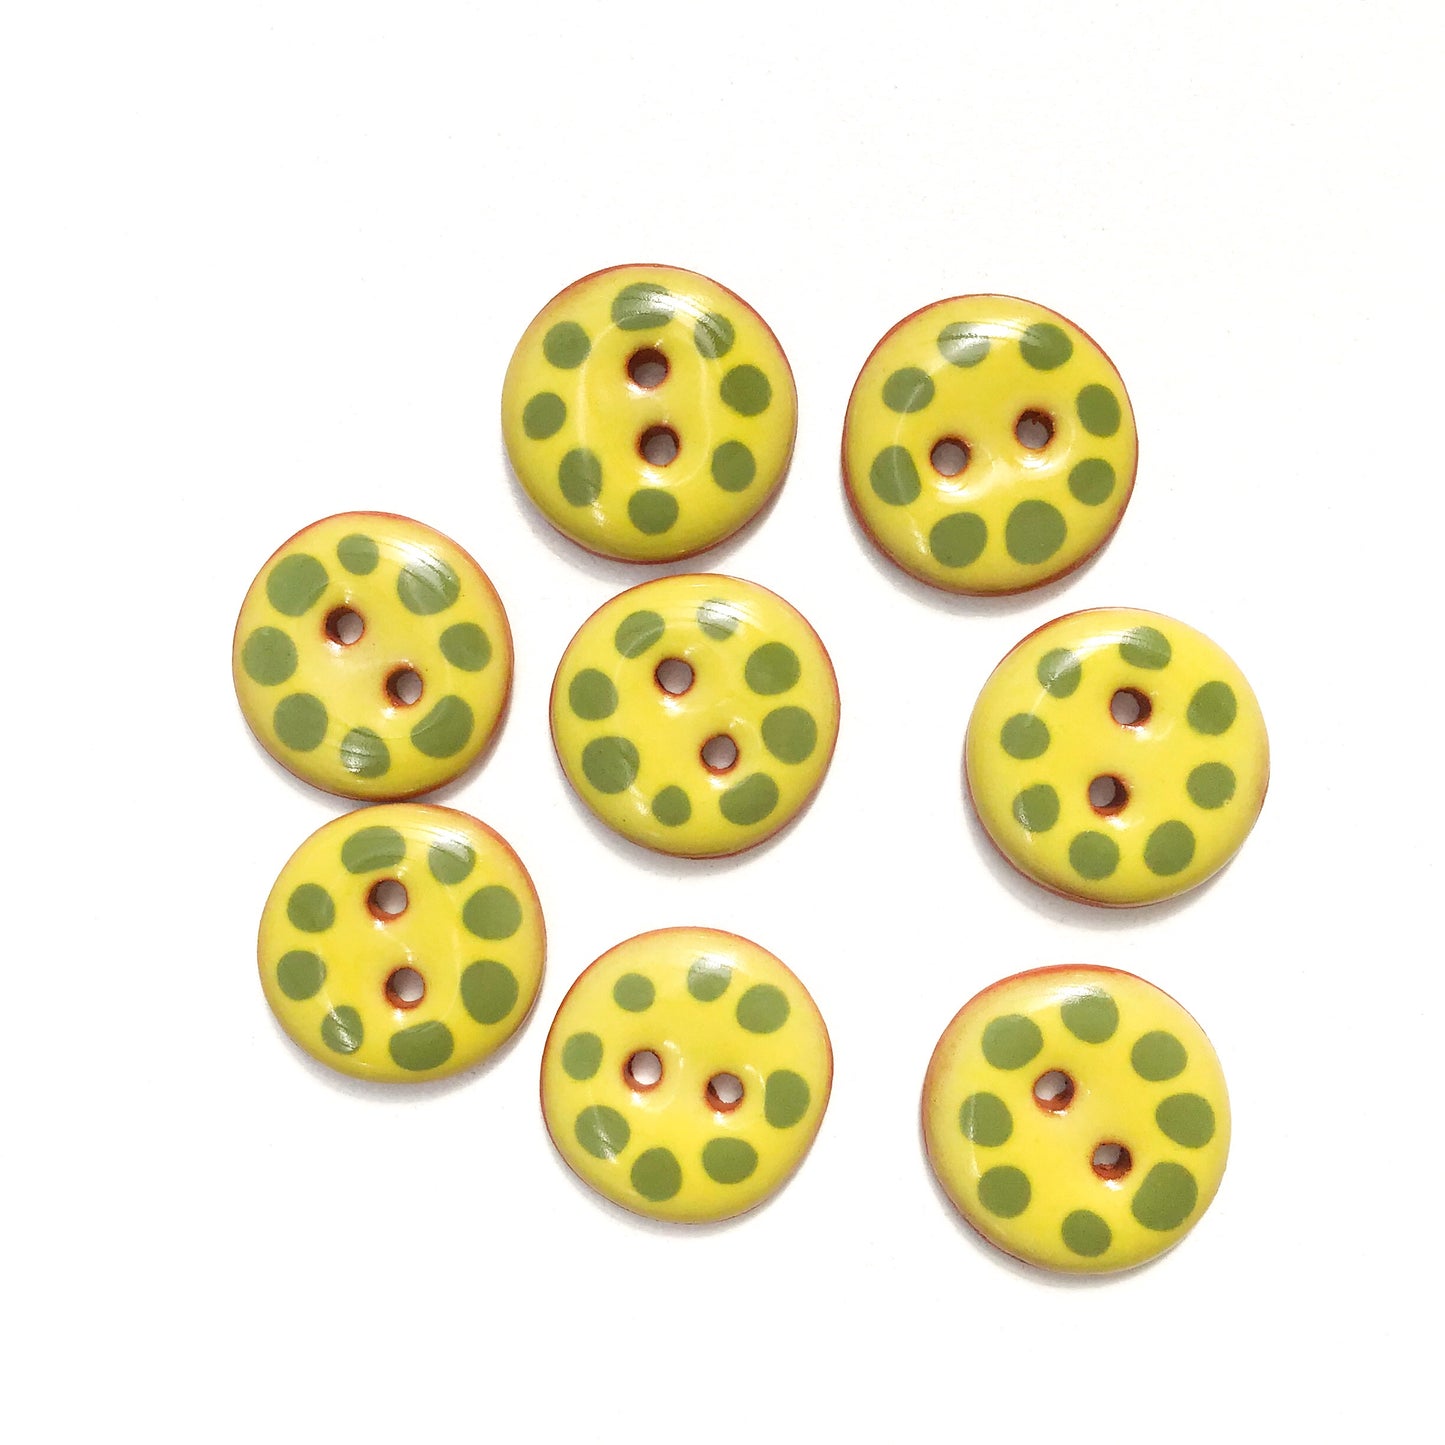 Chartreuse Cobblestone Ceramic Buttons with Olive Green Dots - Chartreuse Clay Buttons - 11/16" - 8 Pack